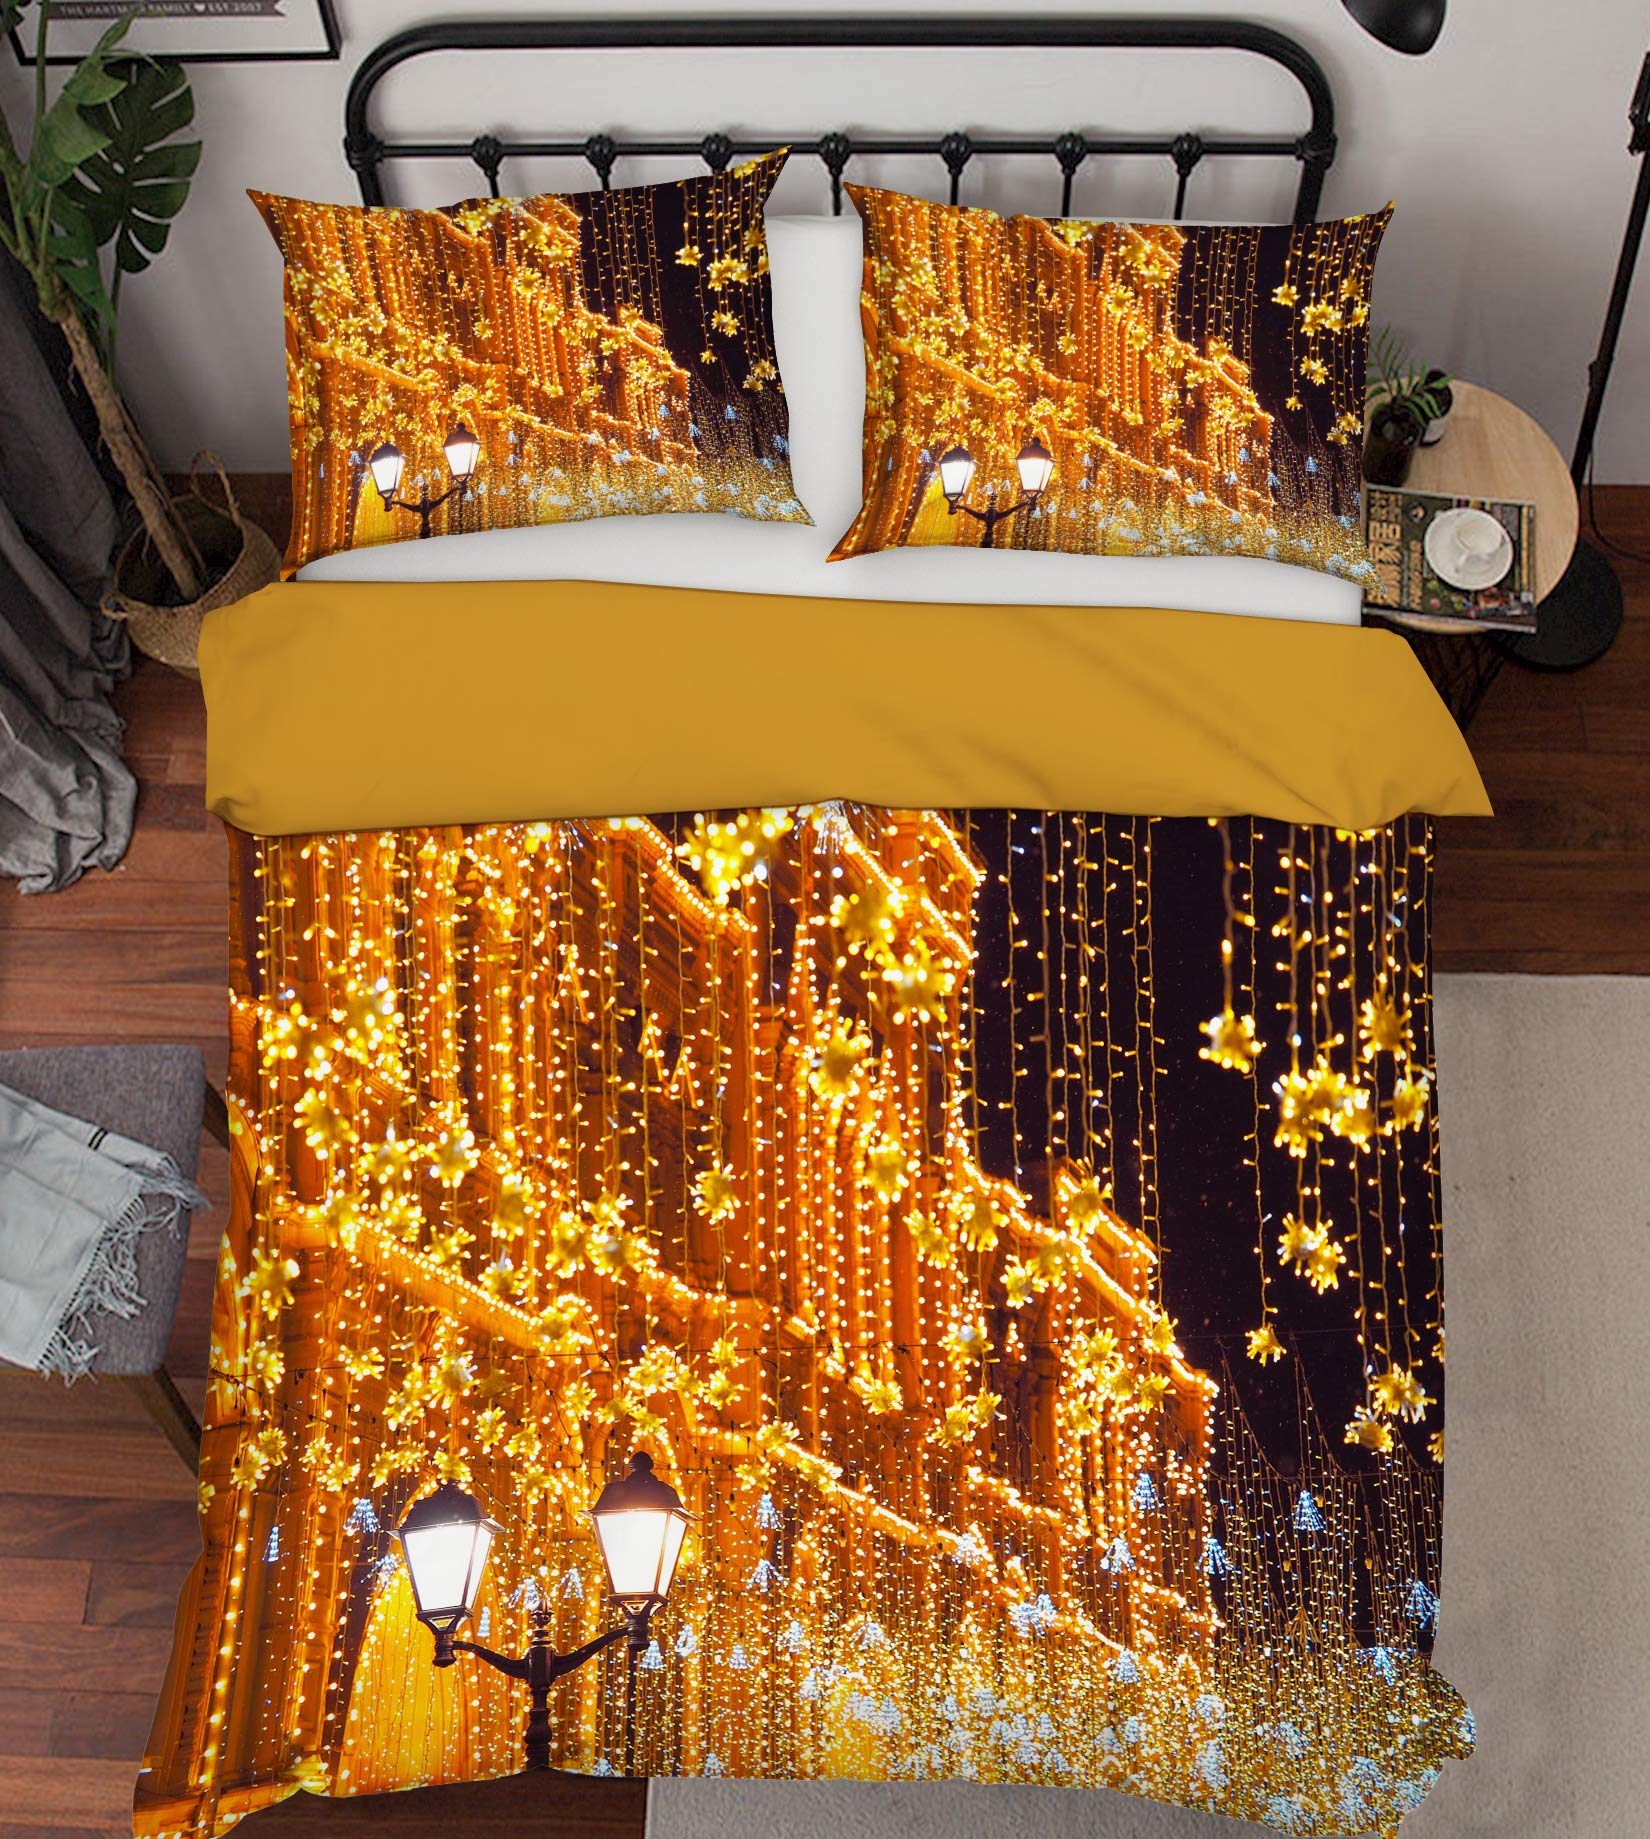 3D Architectural String Lights 51013 Christmas Quilt Duvet Cover Xmas Bed Pillowcases